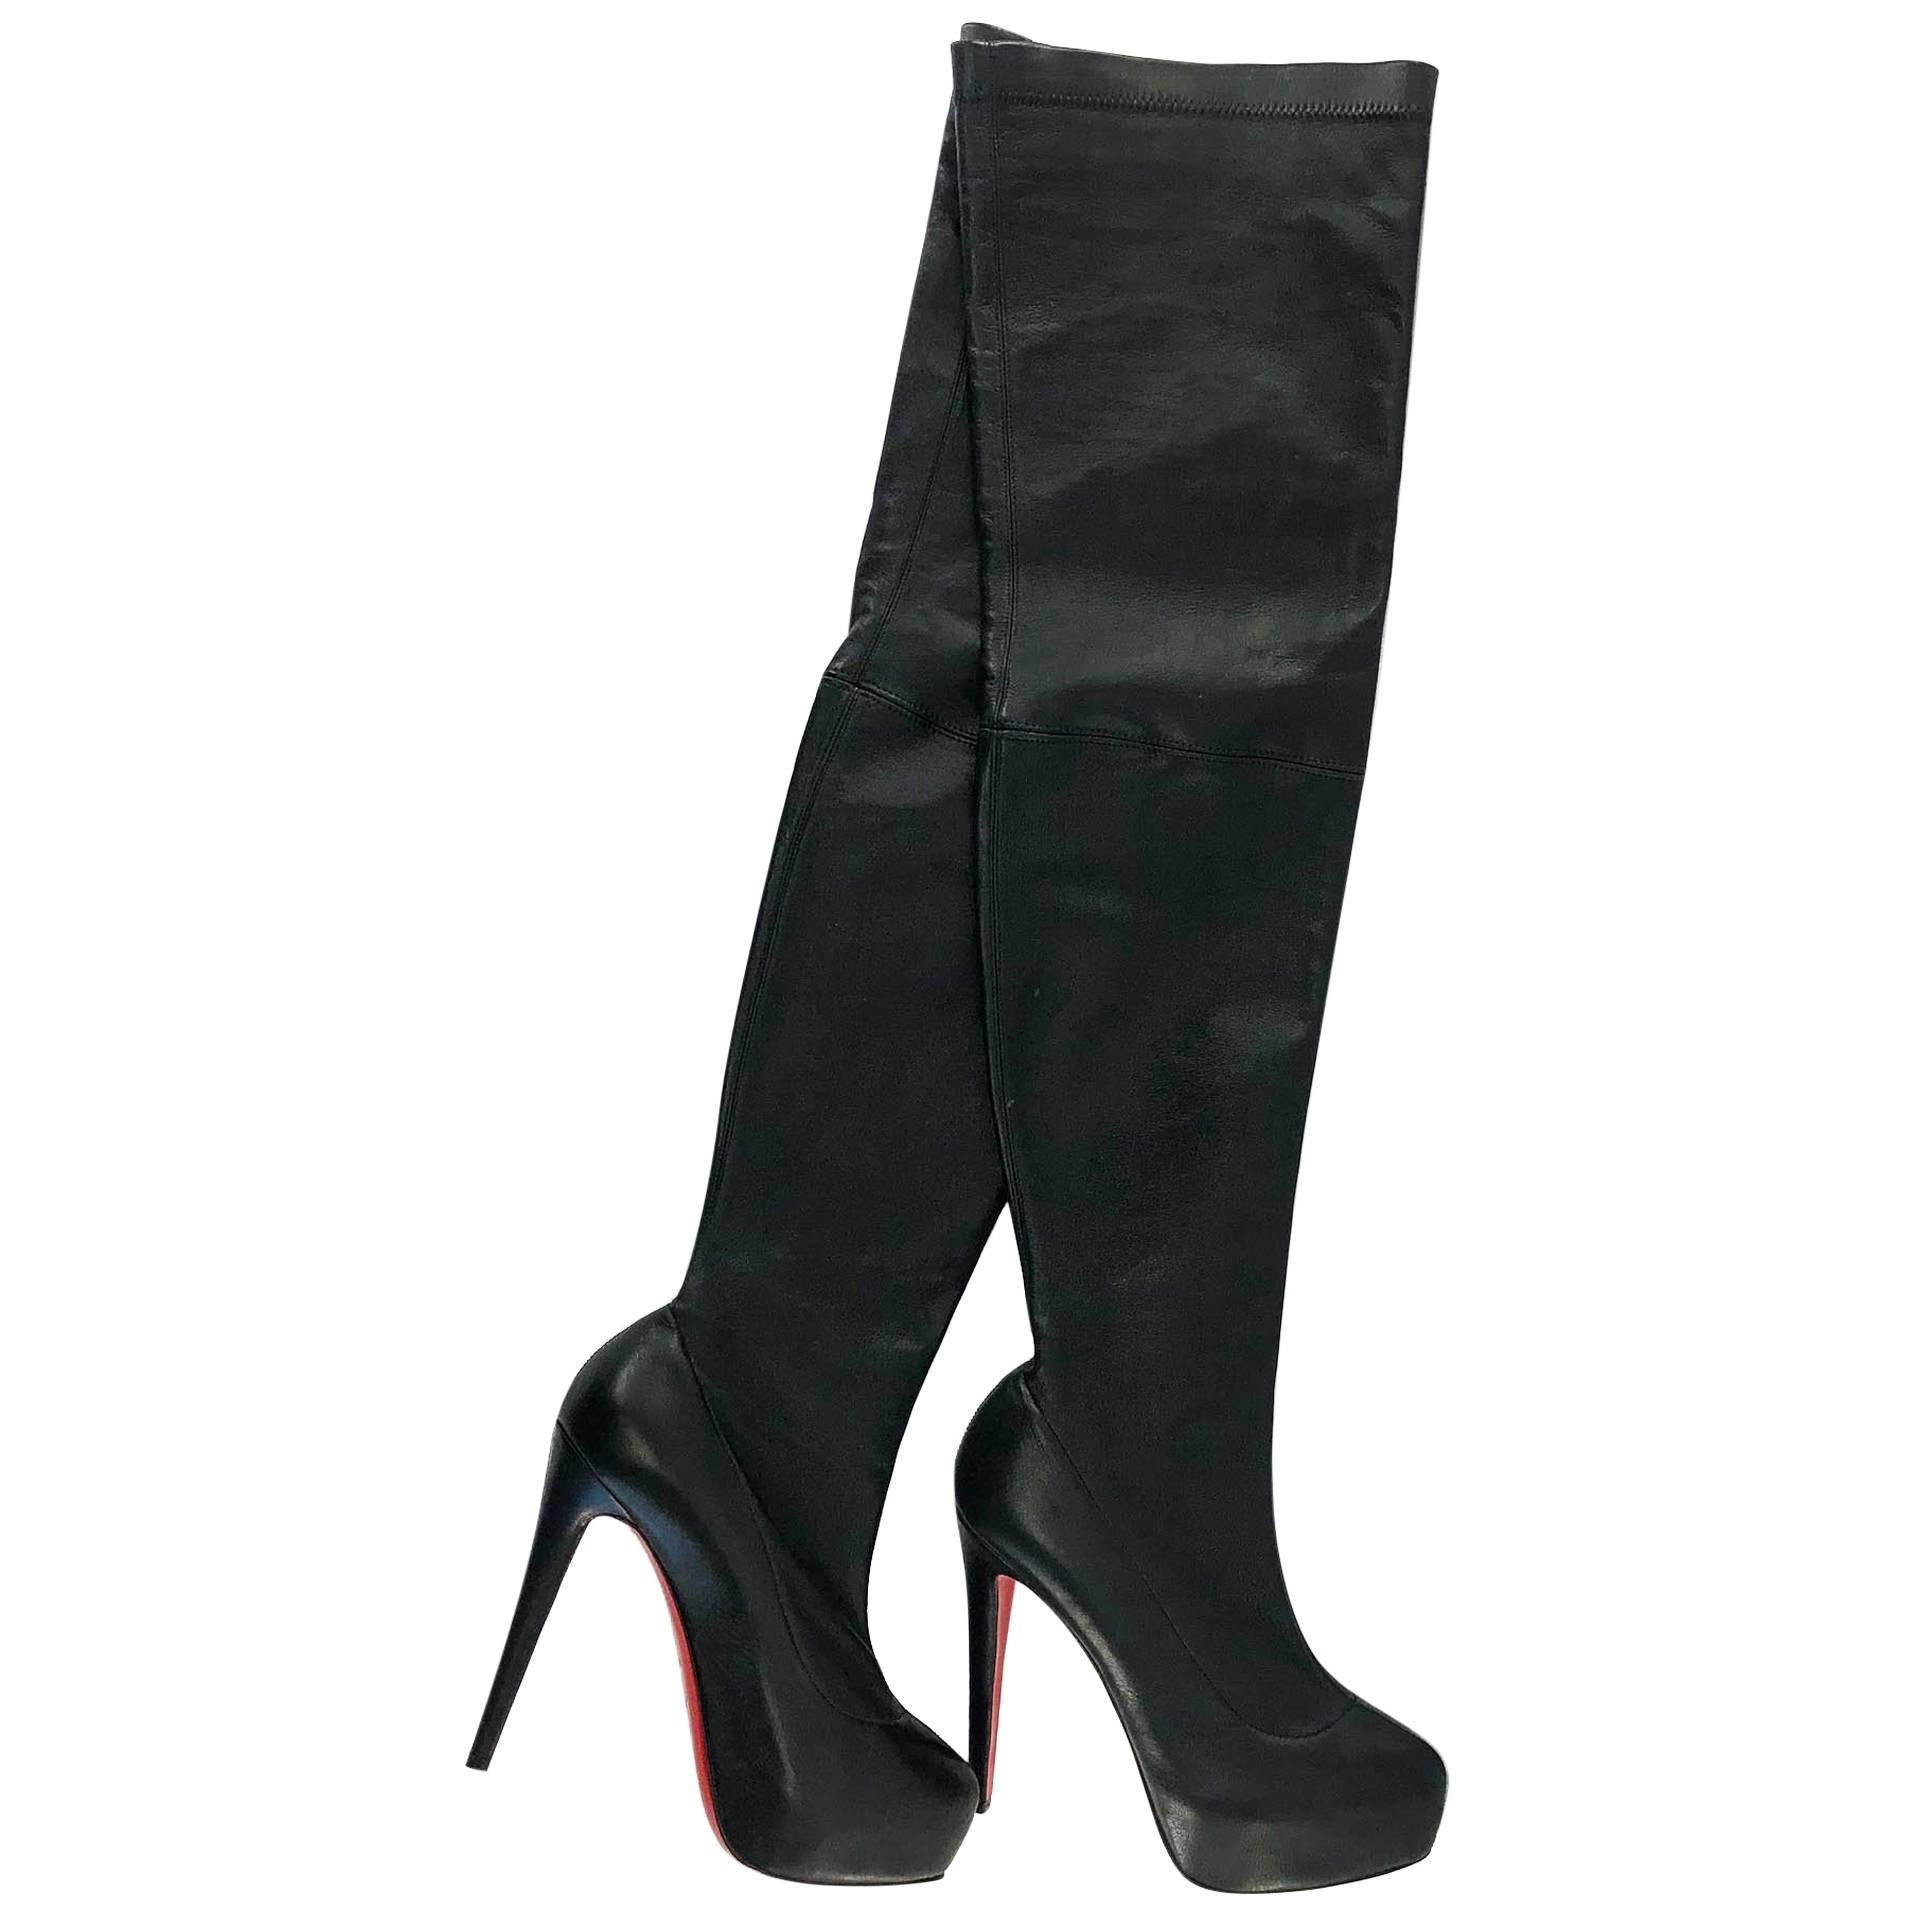 Thigh High Christian Louboutin Boots Size 36.5 120mm For Sale